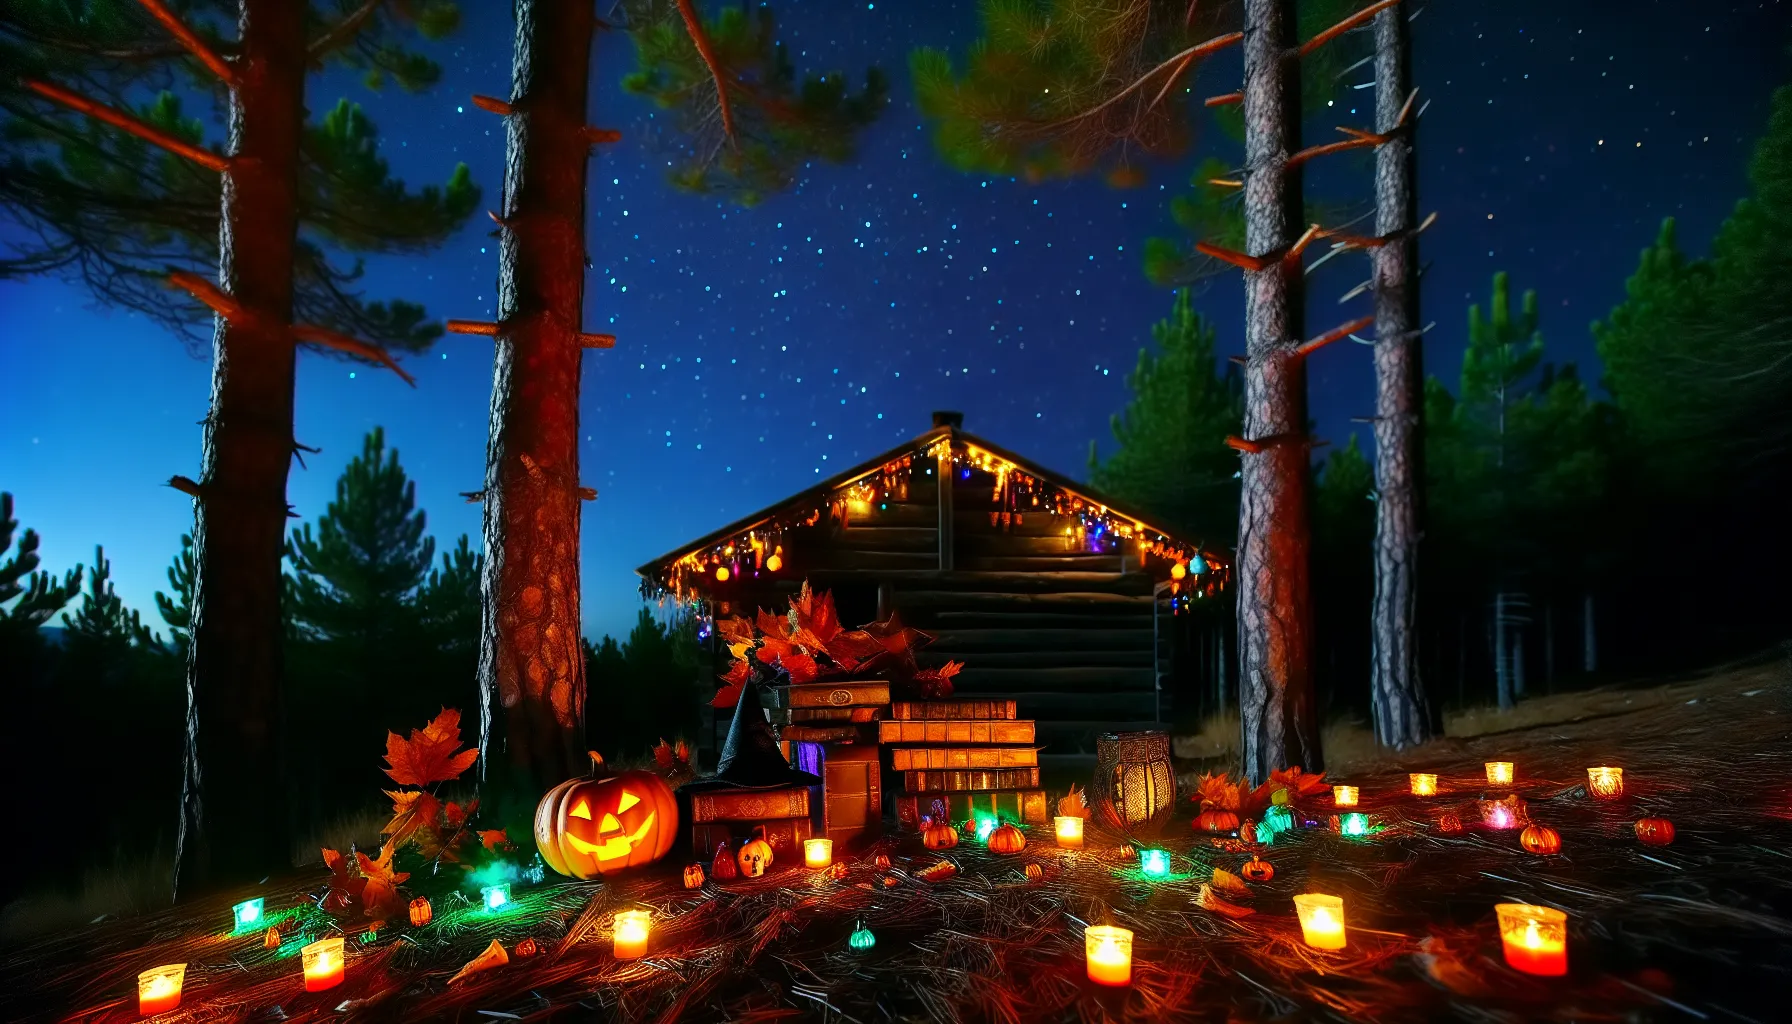 Halloween-themed cabin lit by candles and decorations